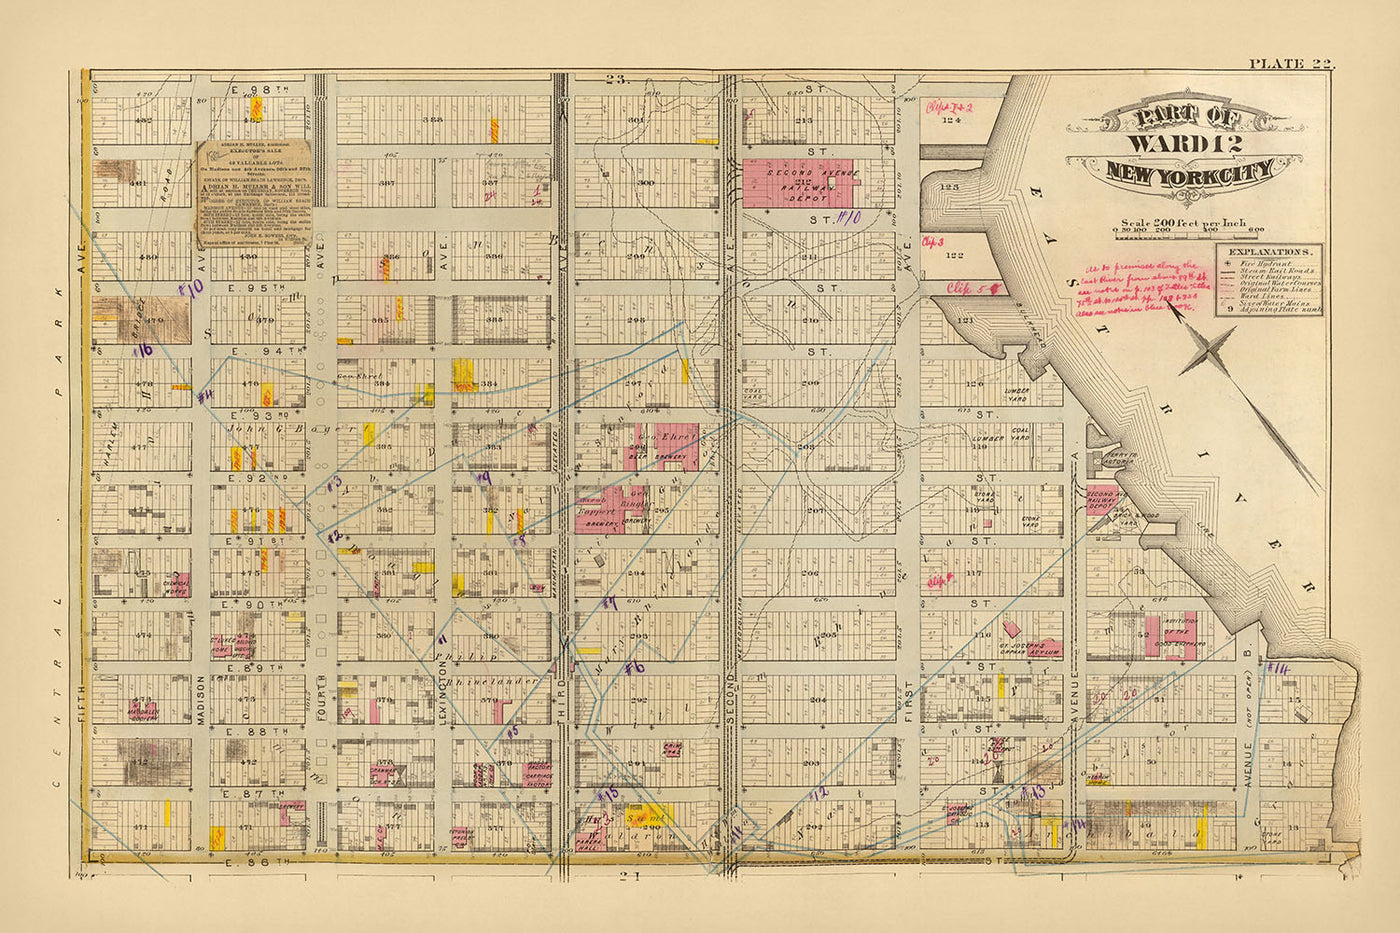 Old Map of Upper East Side, NYC, 1879: Carnegie Hill, Yorkville, East 86th St to East 95th St